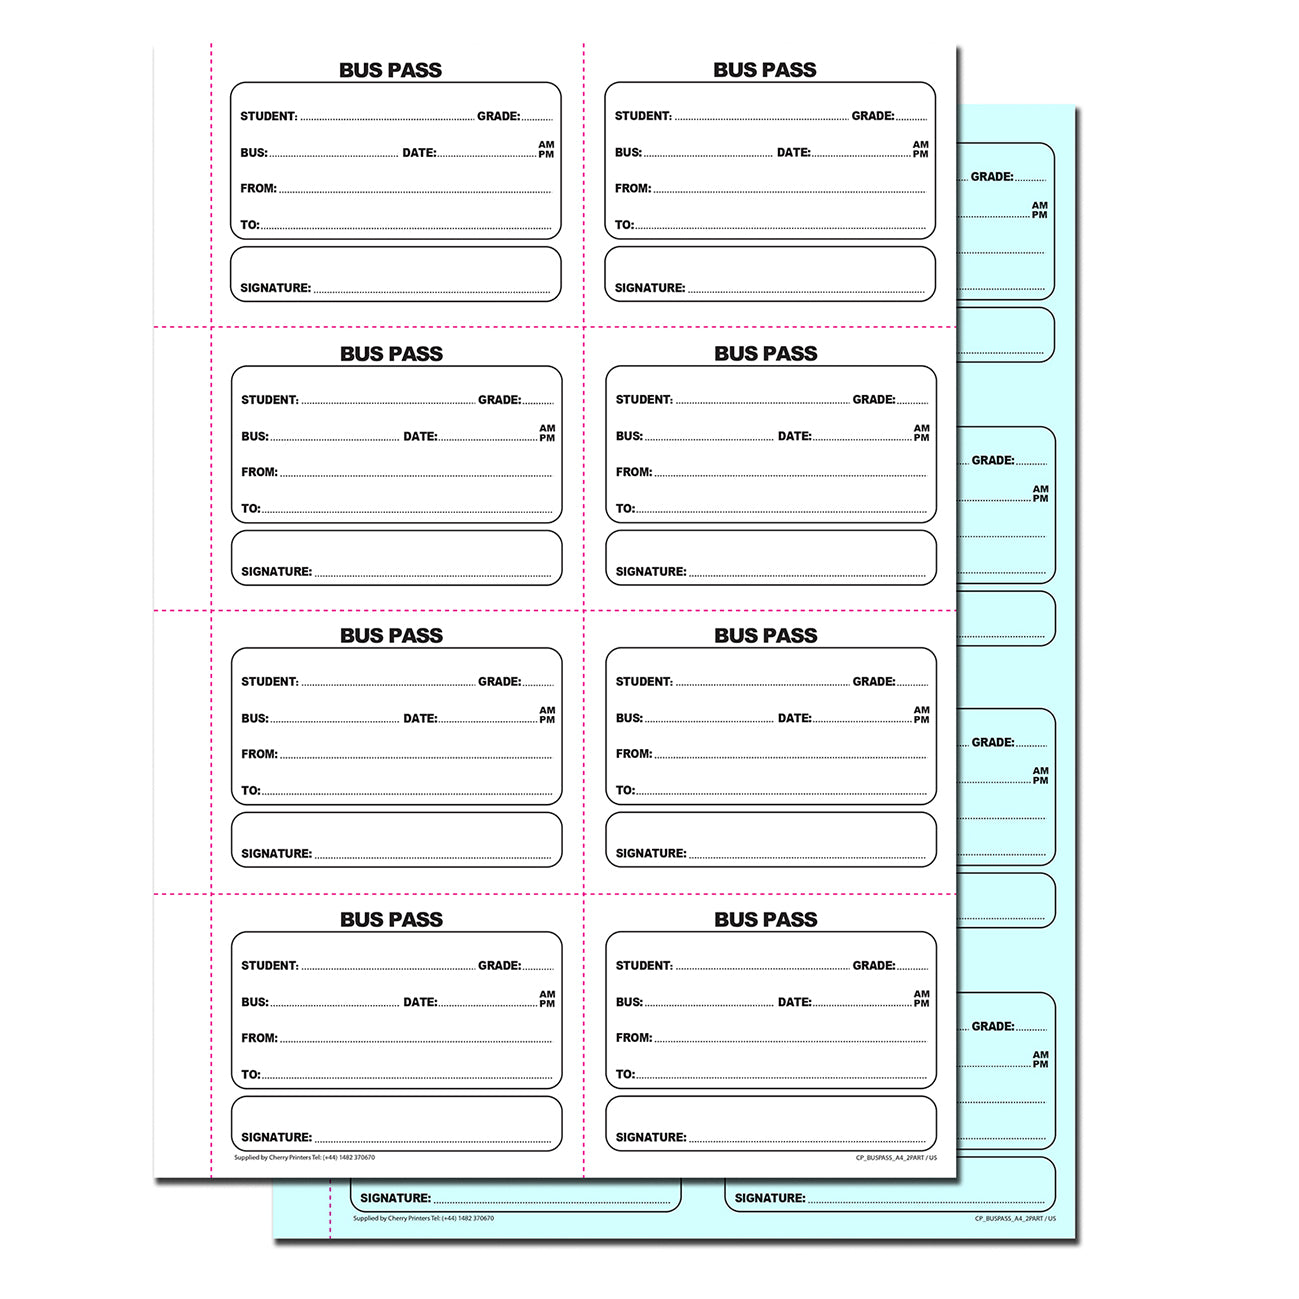 Bus Pass | Fold and Tear | Duplicate Book | 2 part | Carbonless | 400 slips Per Book | A4 - 8.27" x 11.69"